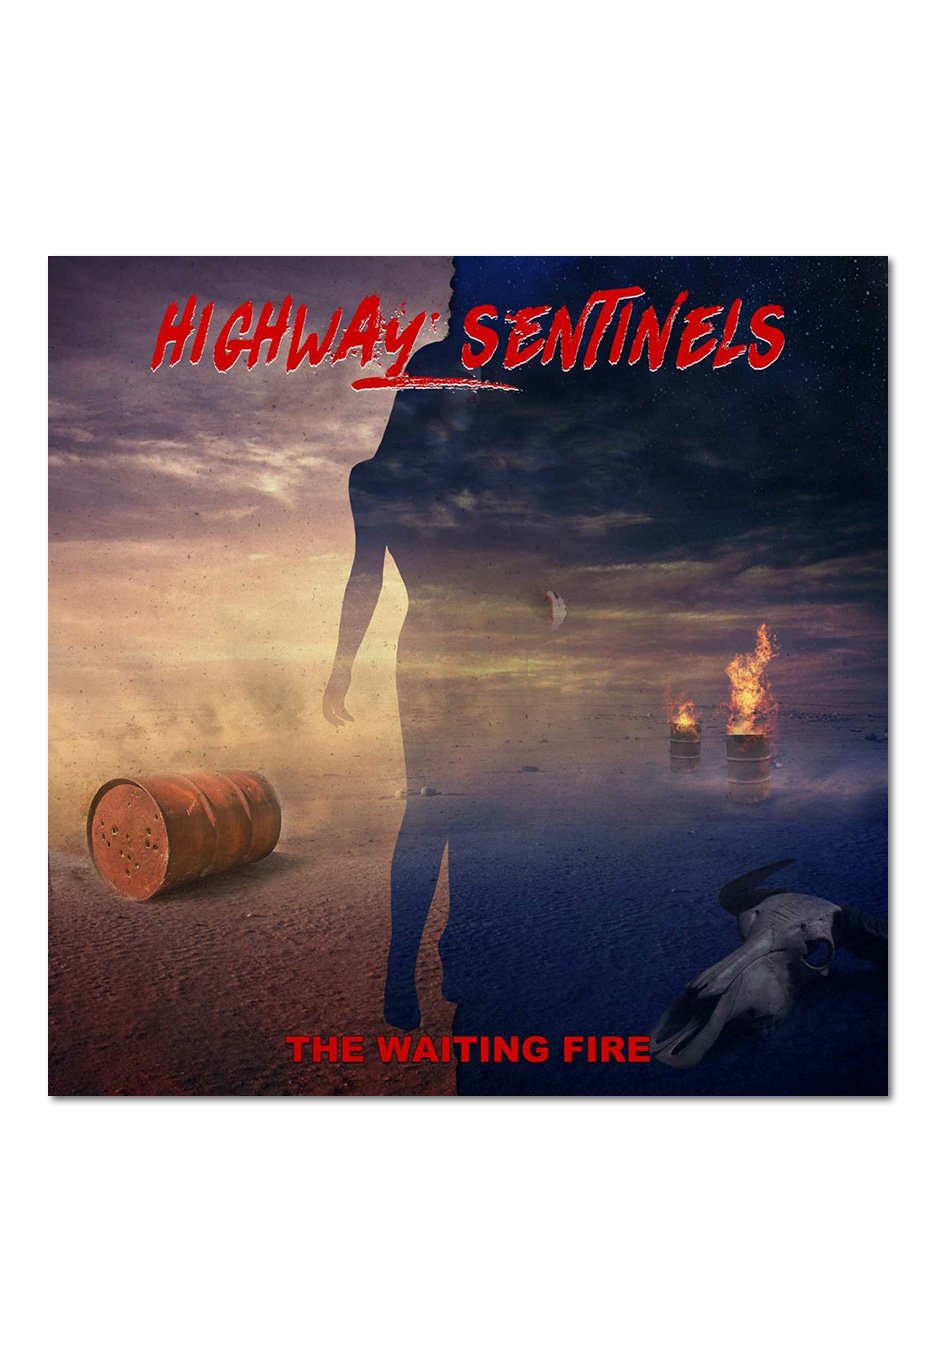 Highway Sentinels - The Waiting Fire - CD